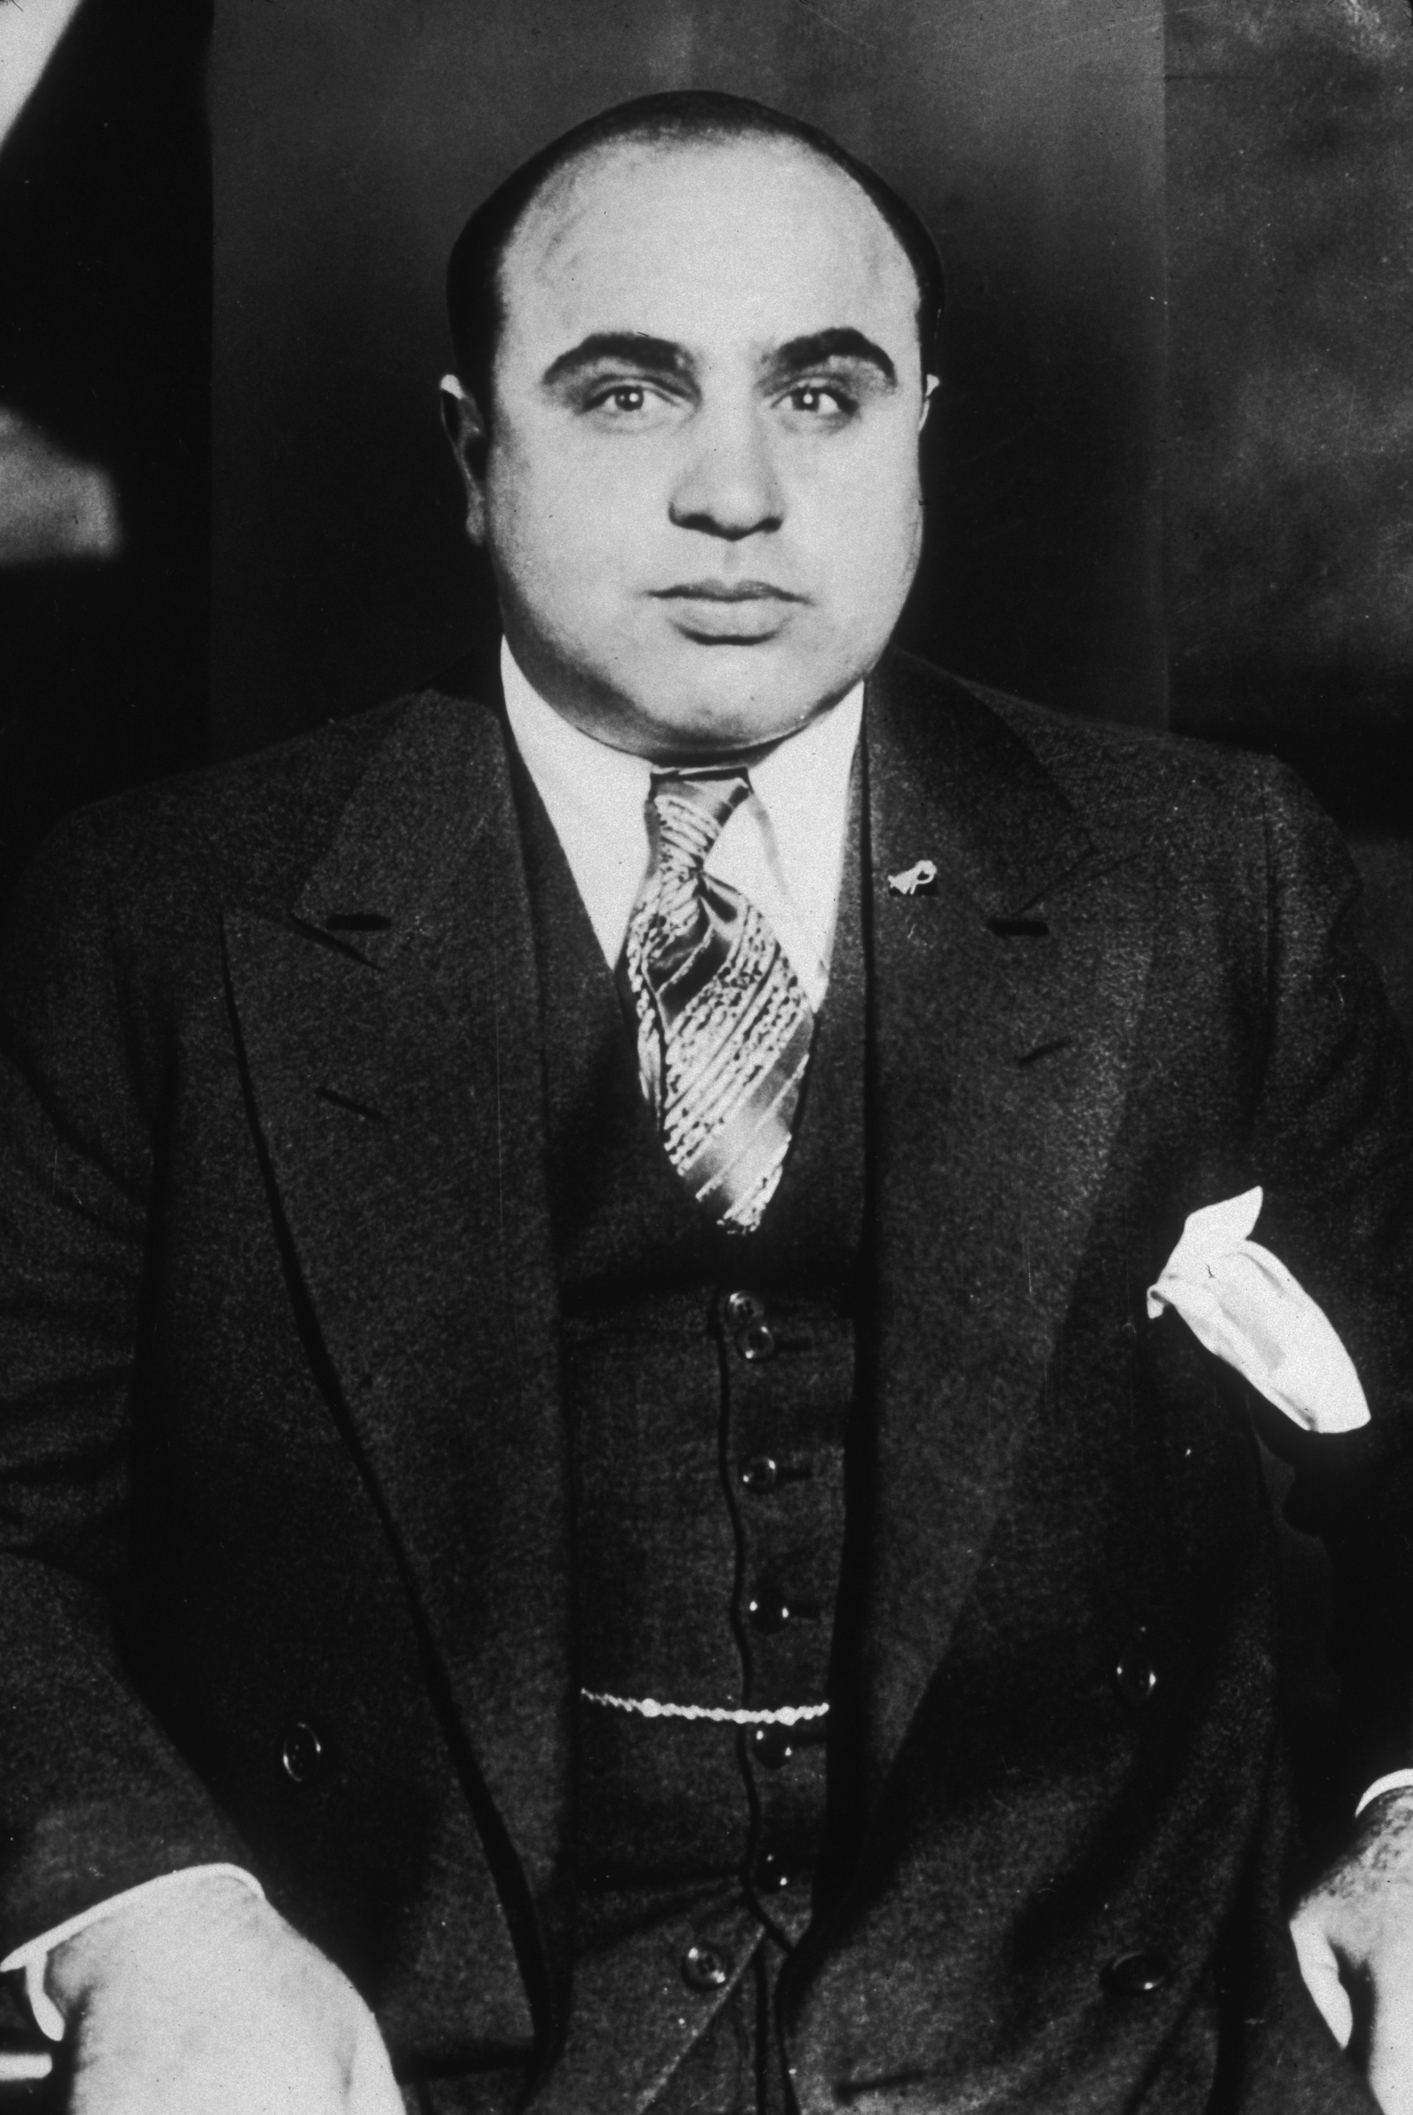 Al Capone, who arranged to have all the money returned to Nebraska.